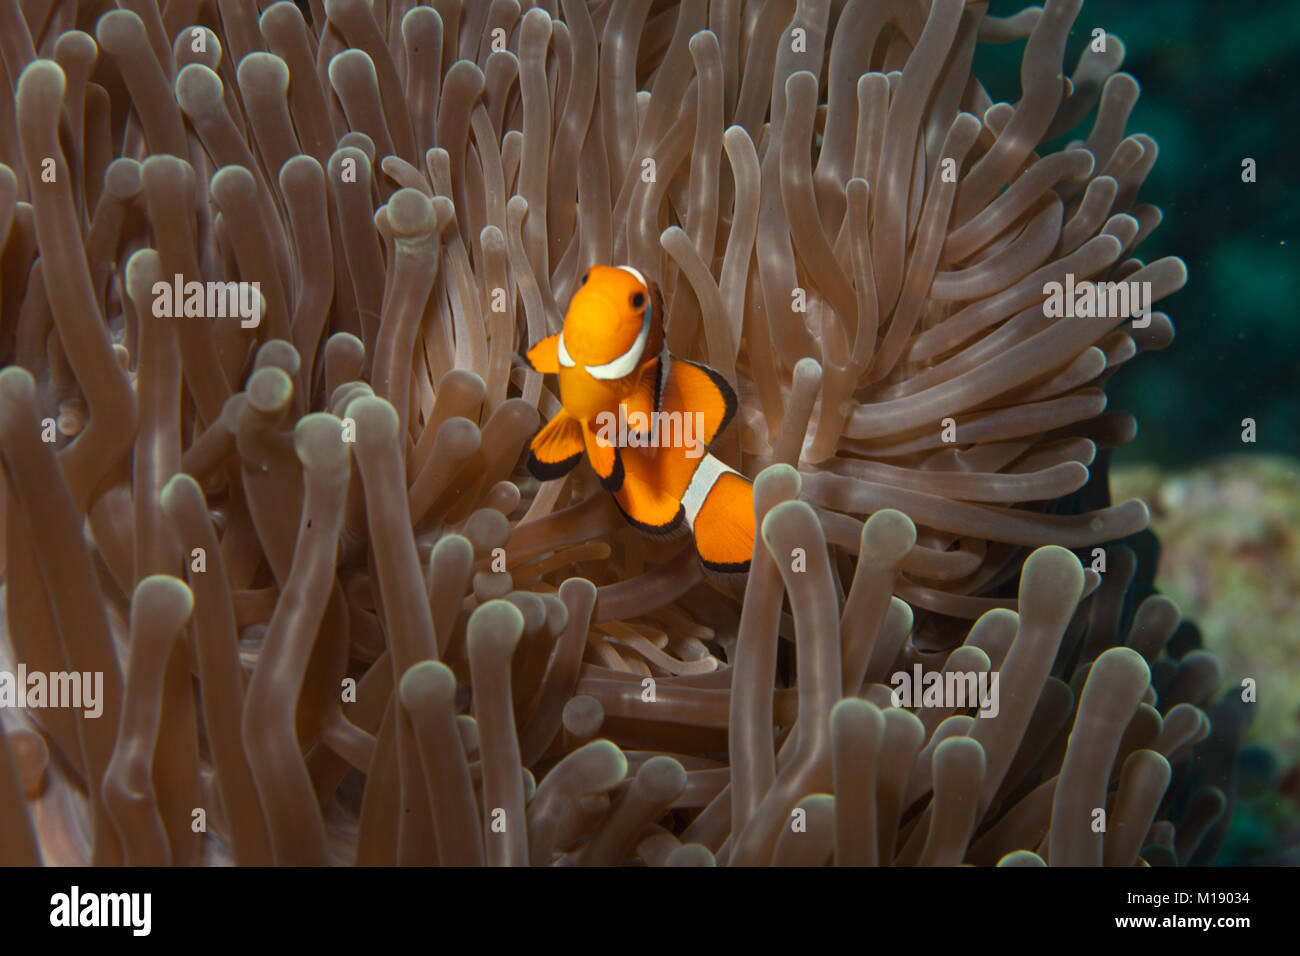 Cute orange anemone fish hiding in its protective house Stock Photo